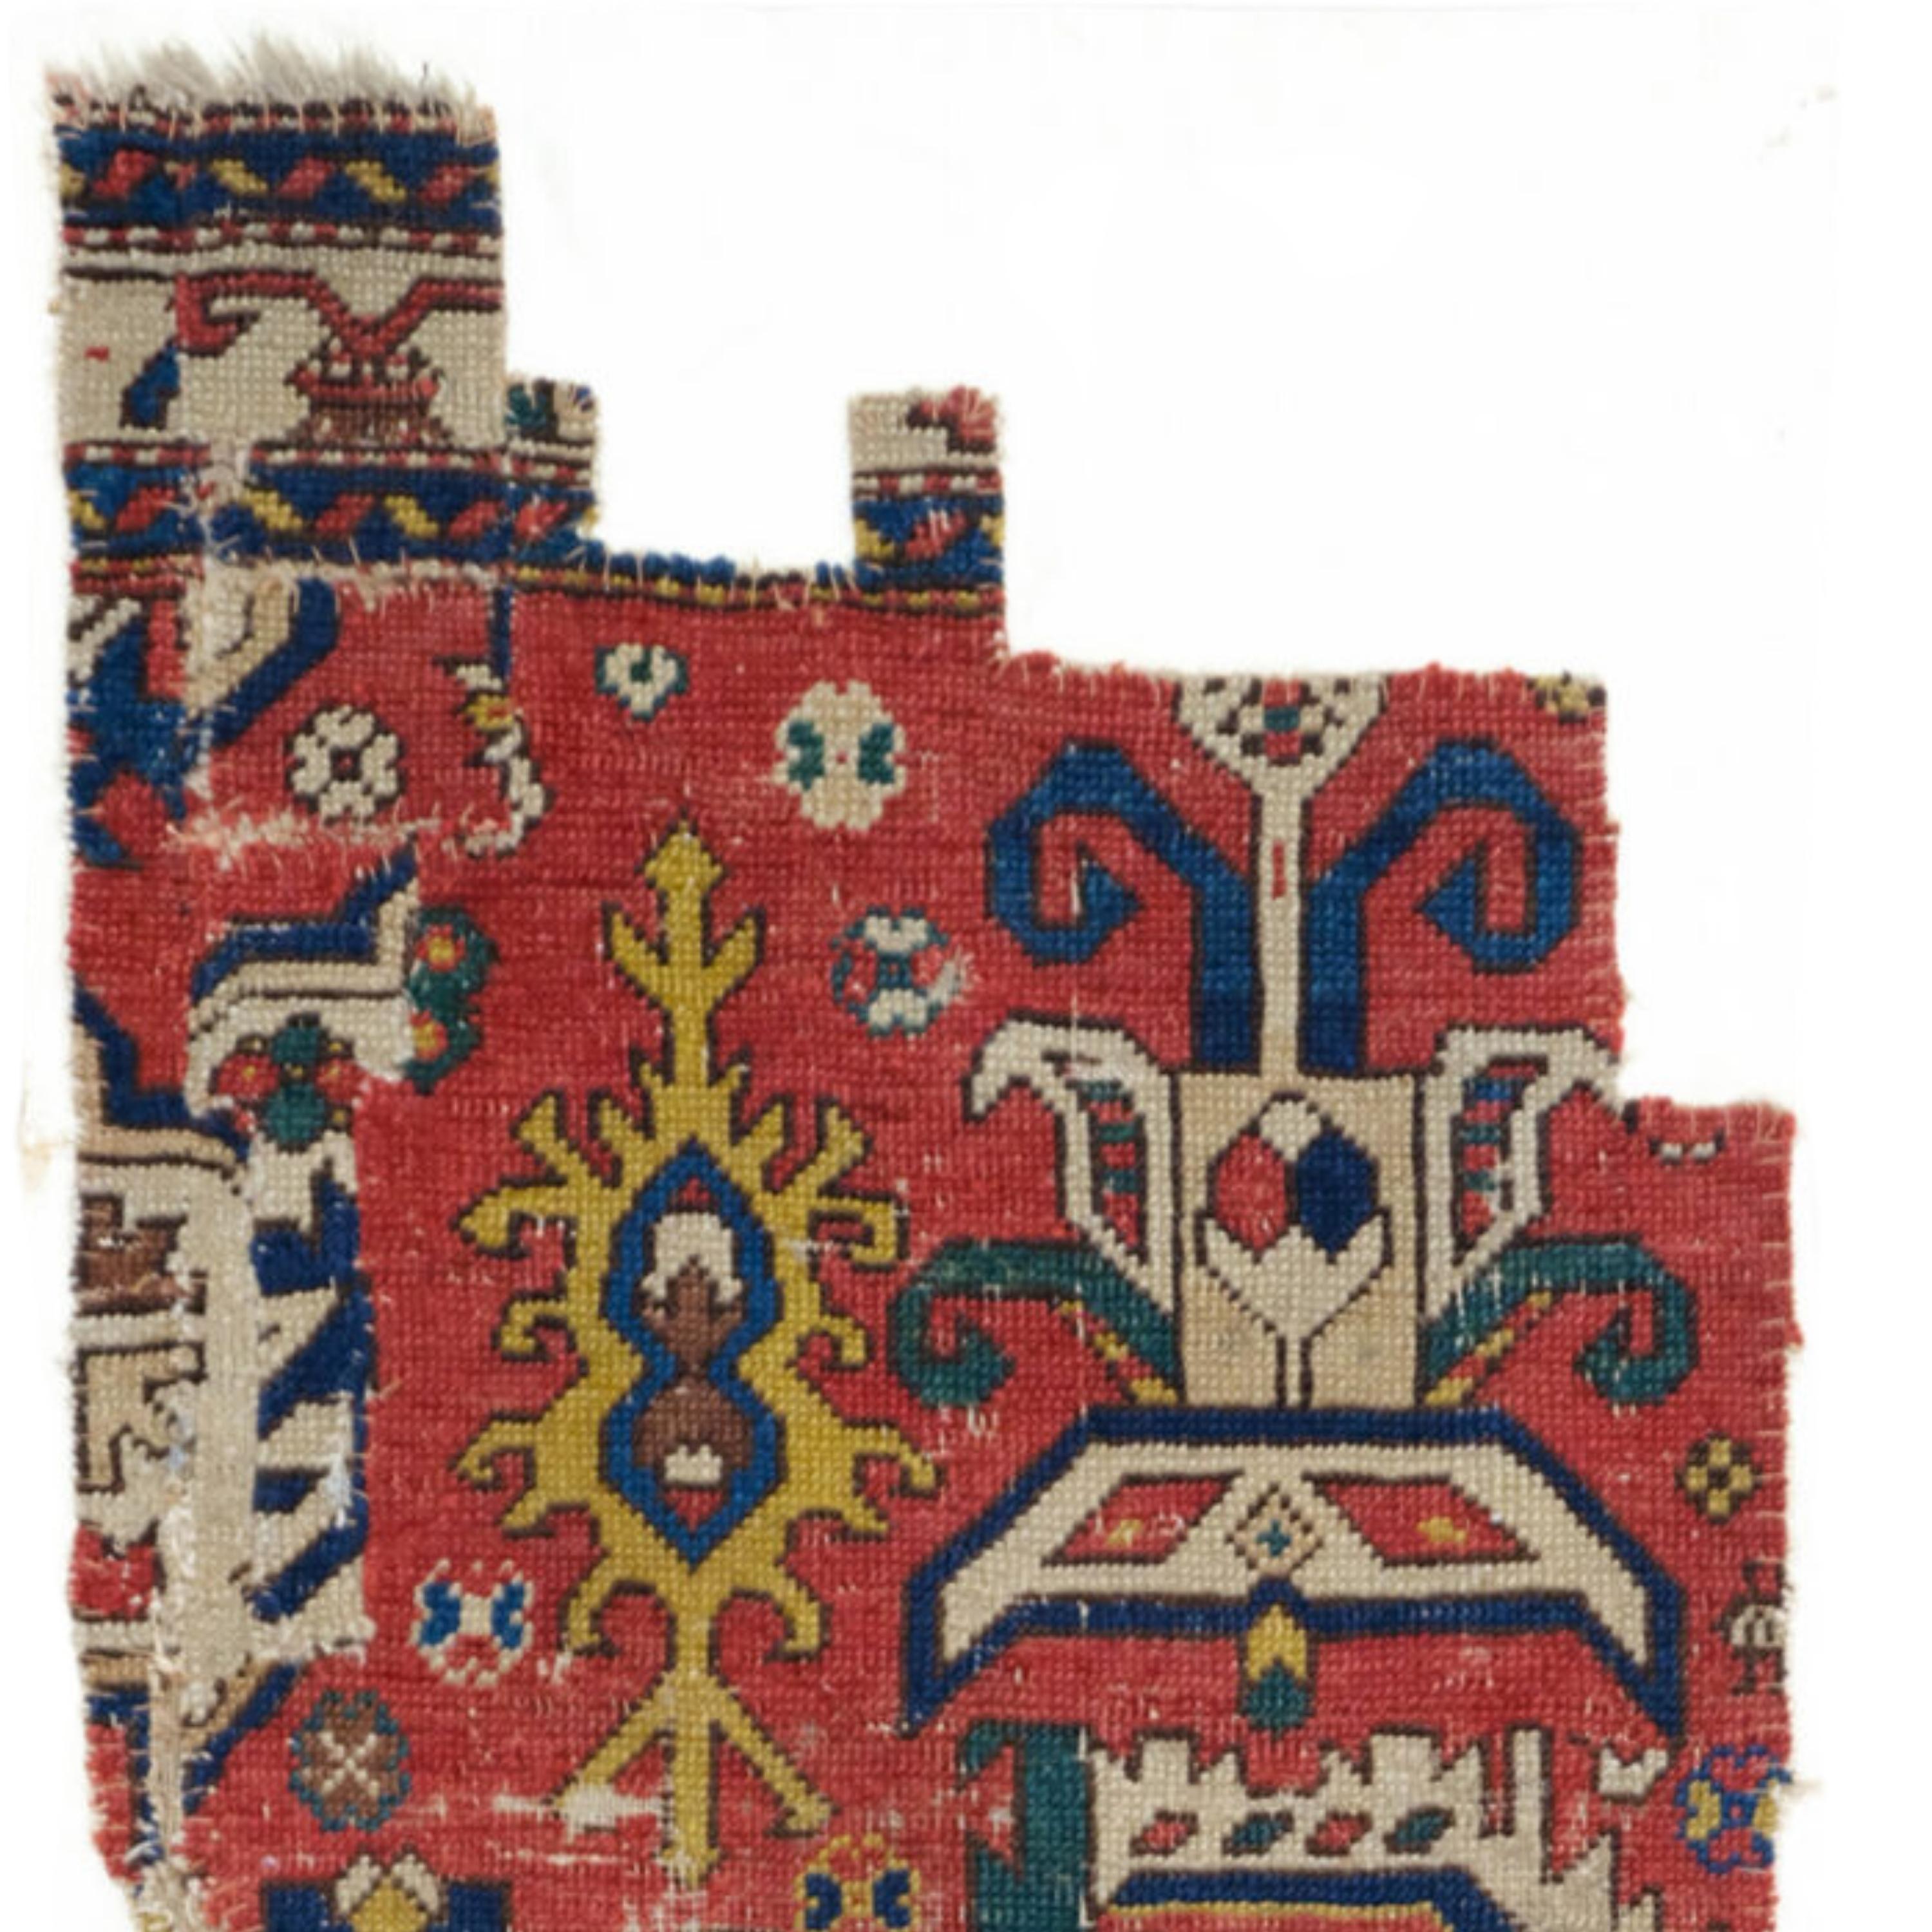 Antique Caucasian Fragment | Caucasian Rugs
18th Century Caucasian Rug Fragment
Size : 44×166 cm (17,3x65,3 In)

The squat medallion with its hooked profile and the field design of this fragment is closely related to rug in a Hamburg private